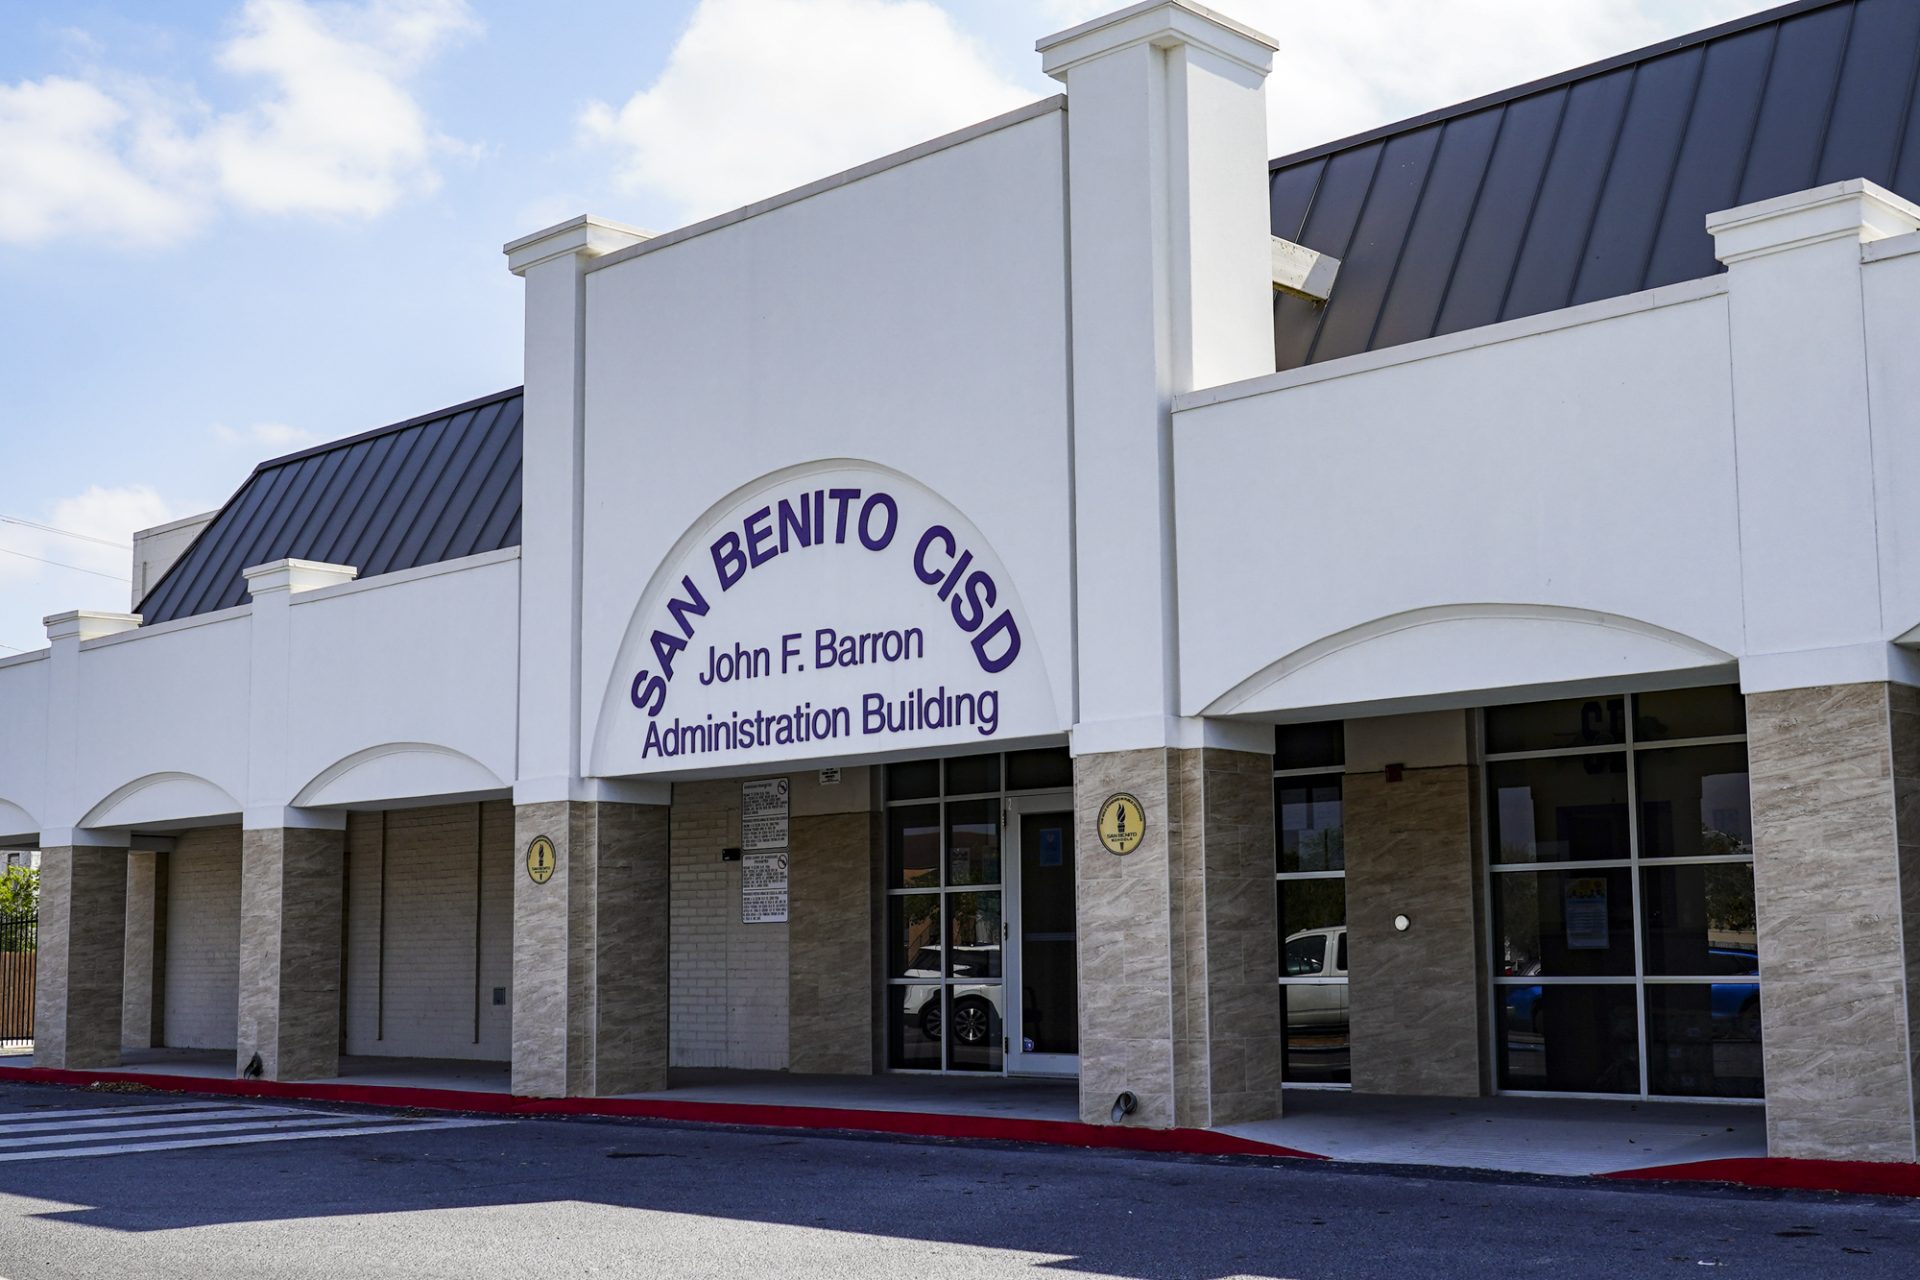 San Benito CISD attorney stands behind statements as insurance company investigates